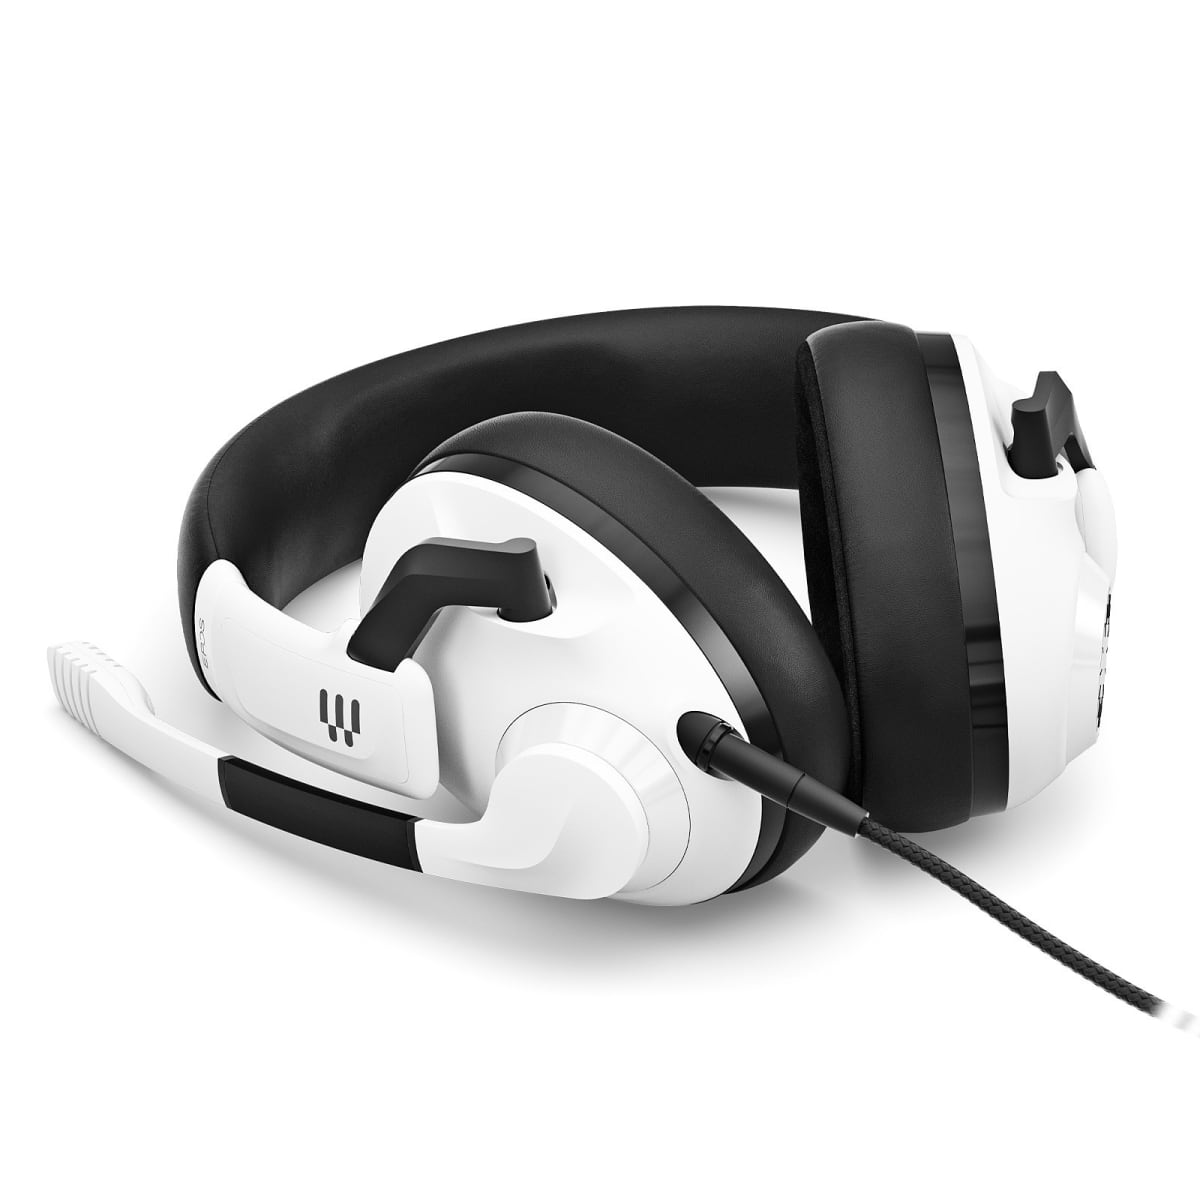 EPOS 1000889 H3 Over-ear Weiß Gaming WHITE, Headset